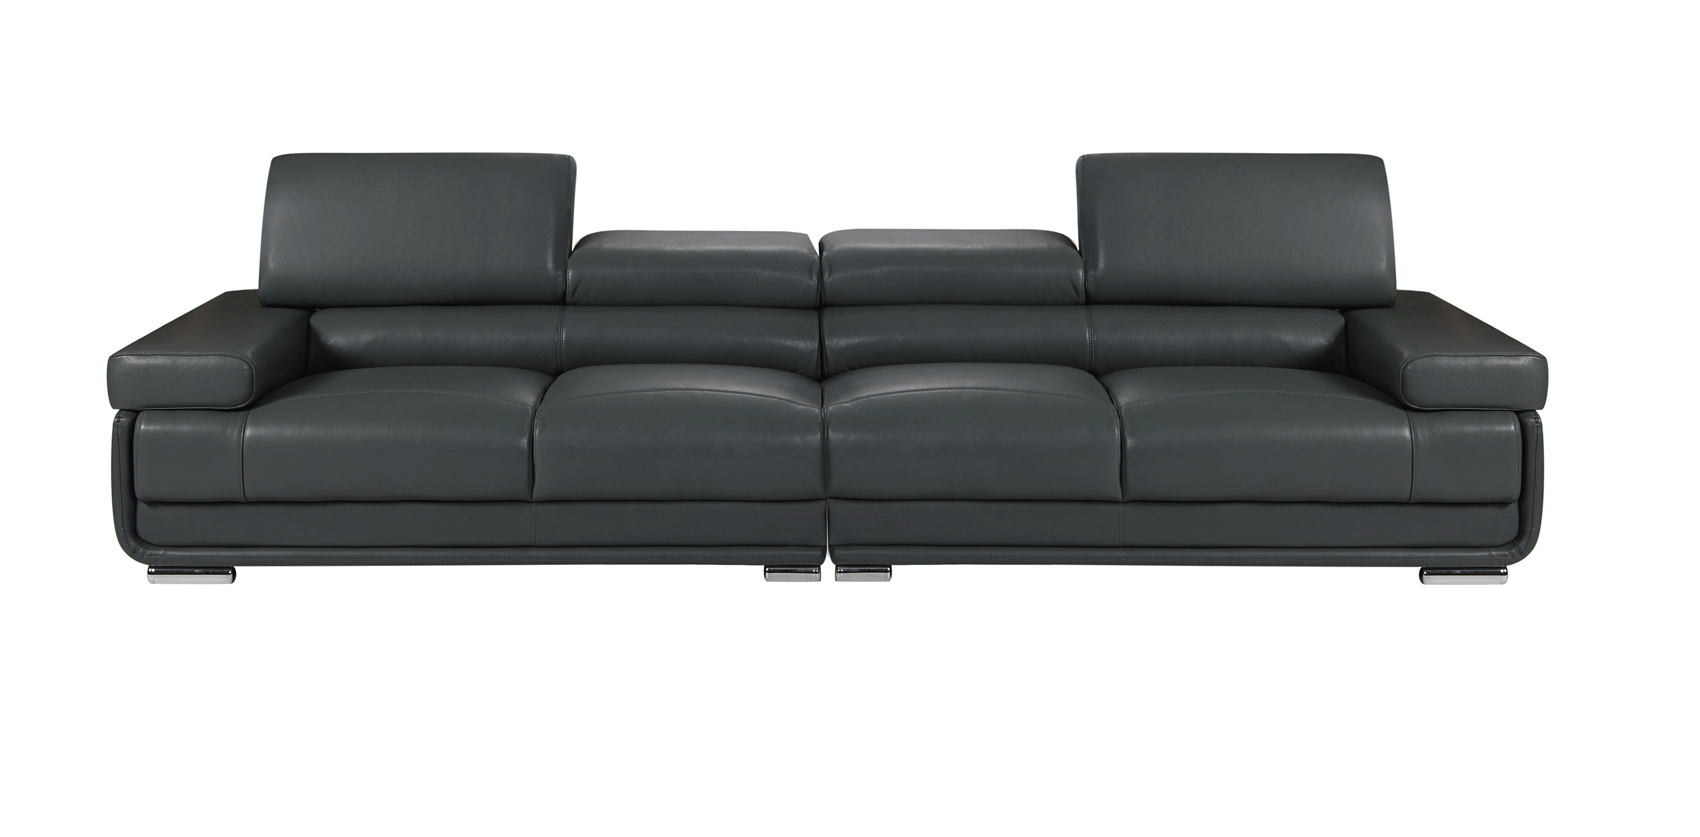 Living Room Furniture Sleepers Sofas Loveseats and Chairs 2119 Sofa, Loveseat, Chair